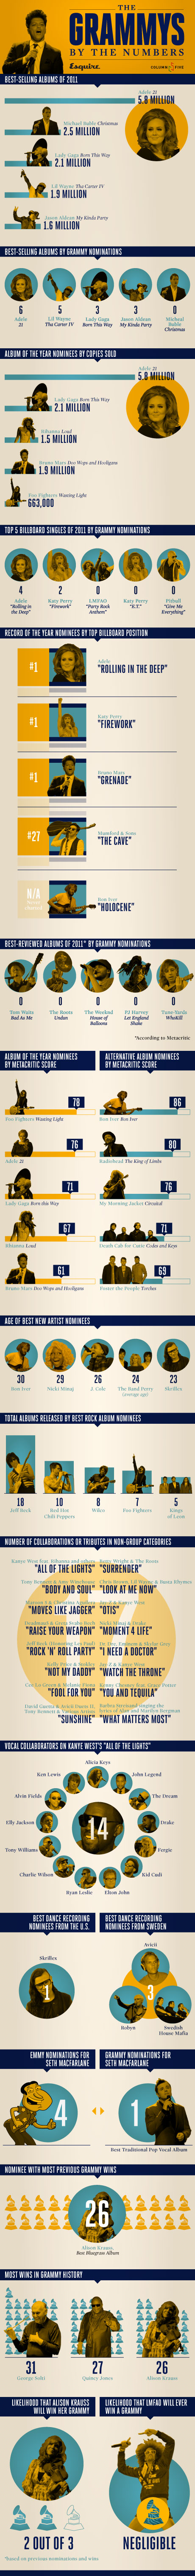 The Truth About The Grammys: A Chart